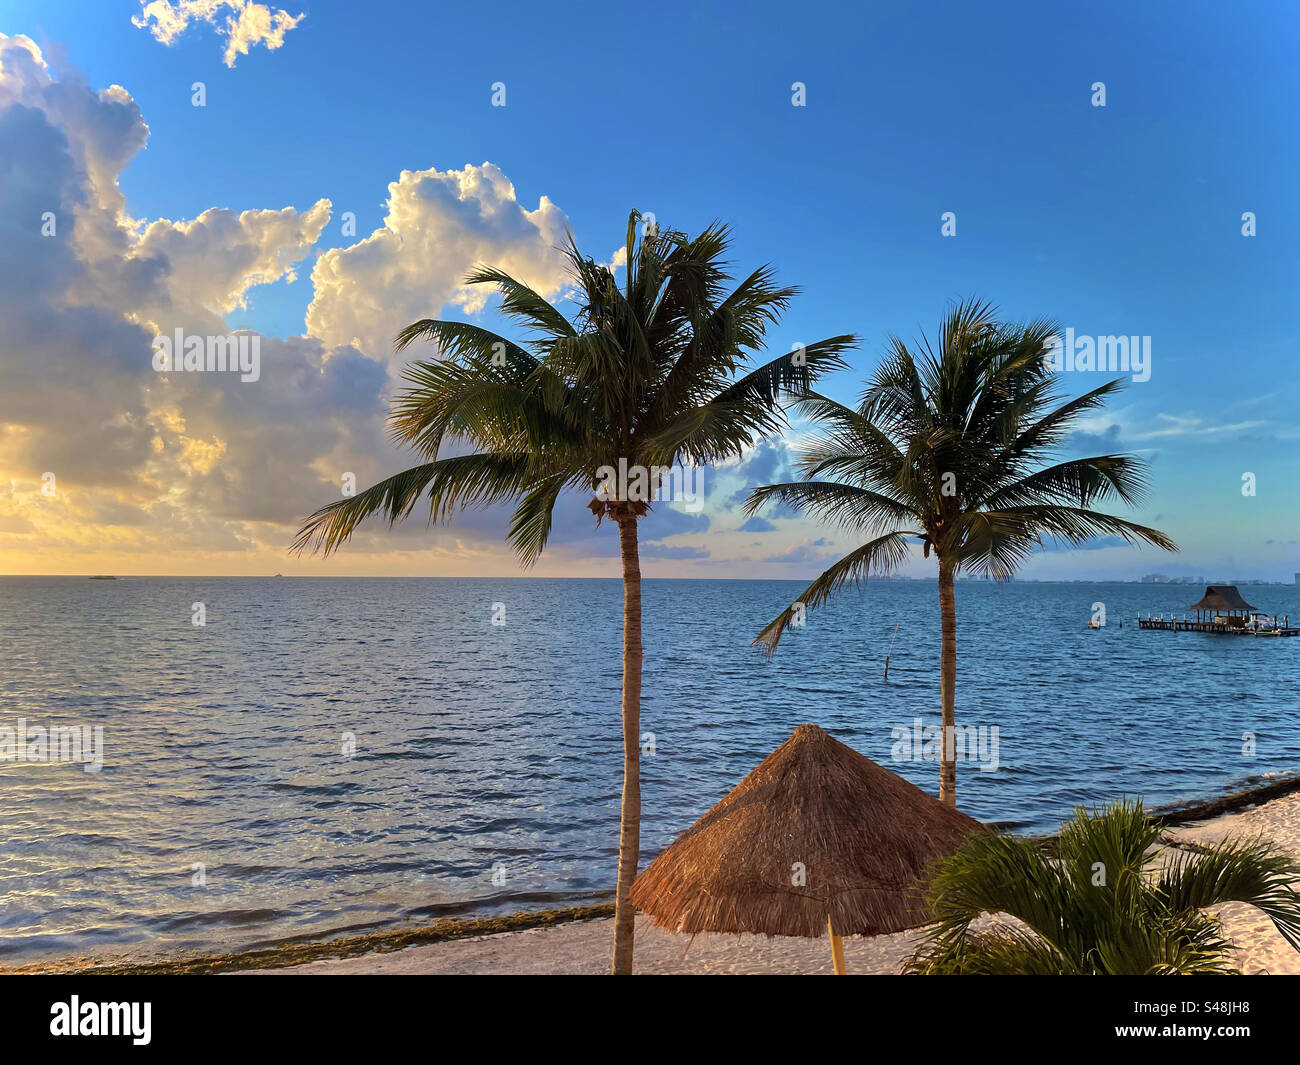 A beautiful afternoon sunset with two palm trees and a straw umbrella in Cancun, Mexico. The water is placid. The sky is golden and blue with clouds. There is sand and seaweed on the beach. Stock Photo